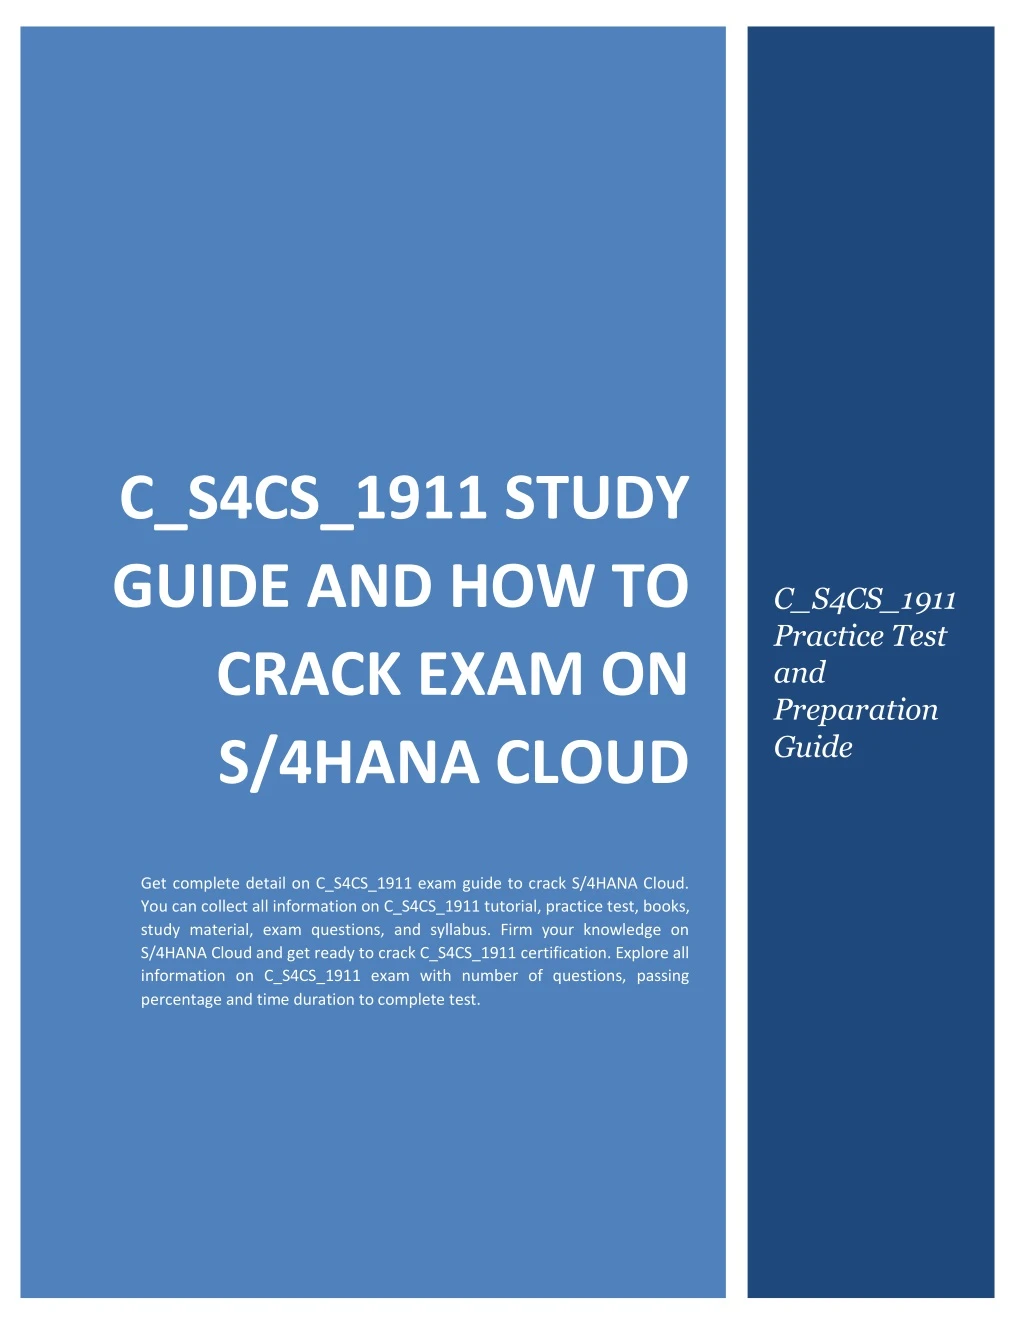 c s4cs 1911 study guide and how to crack exam